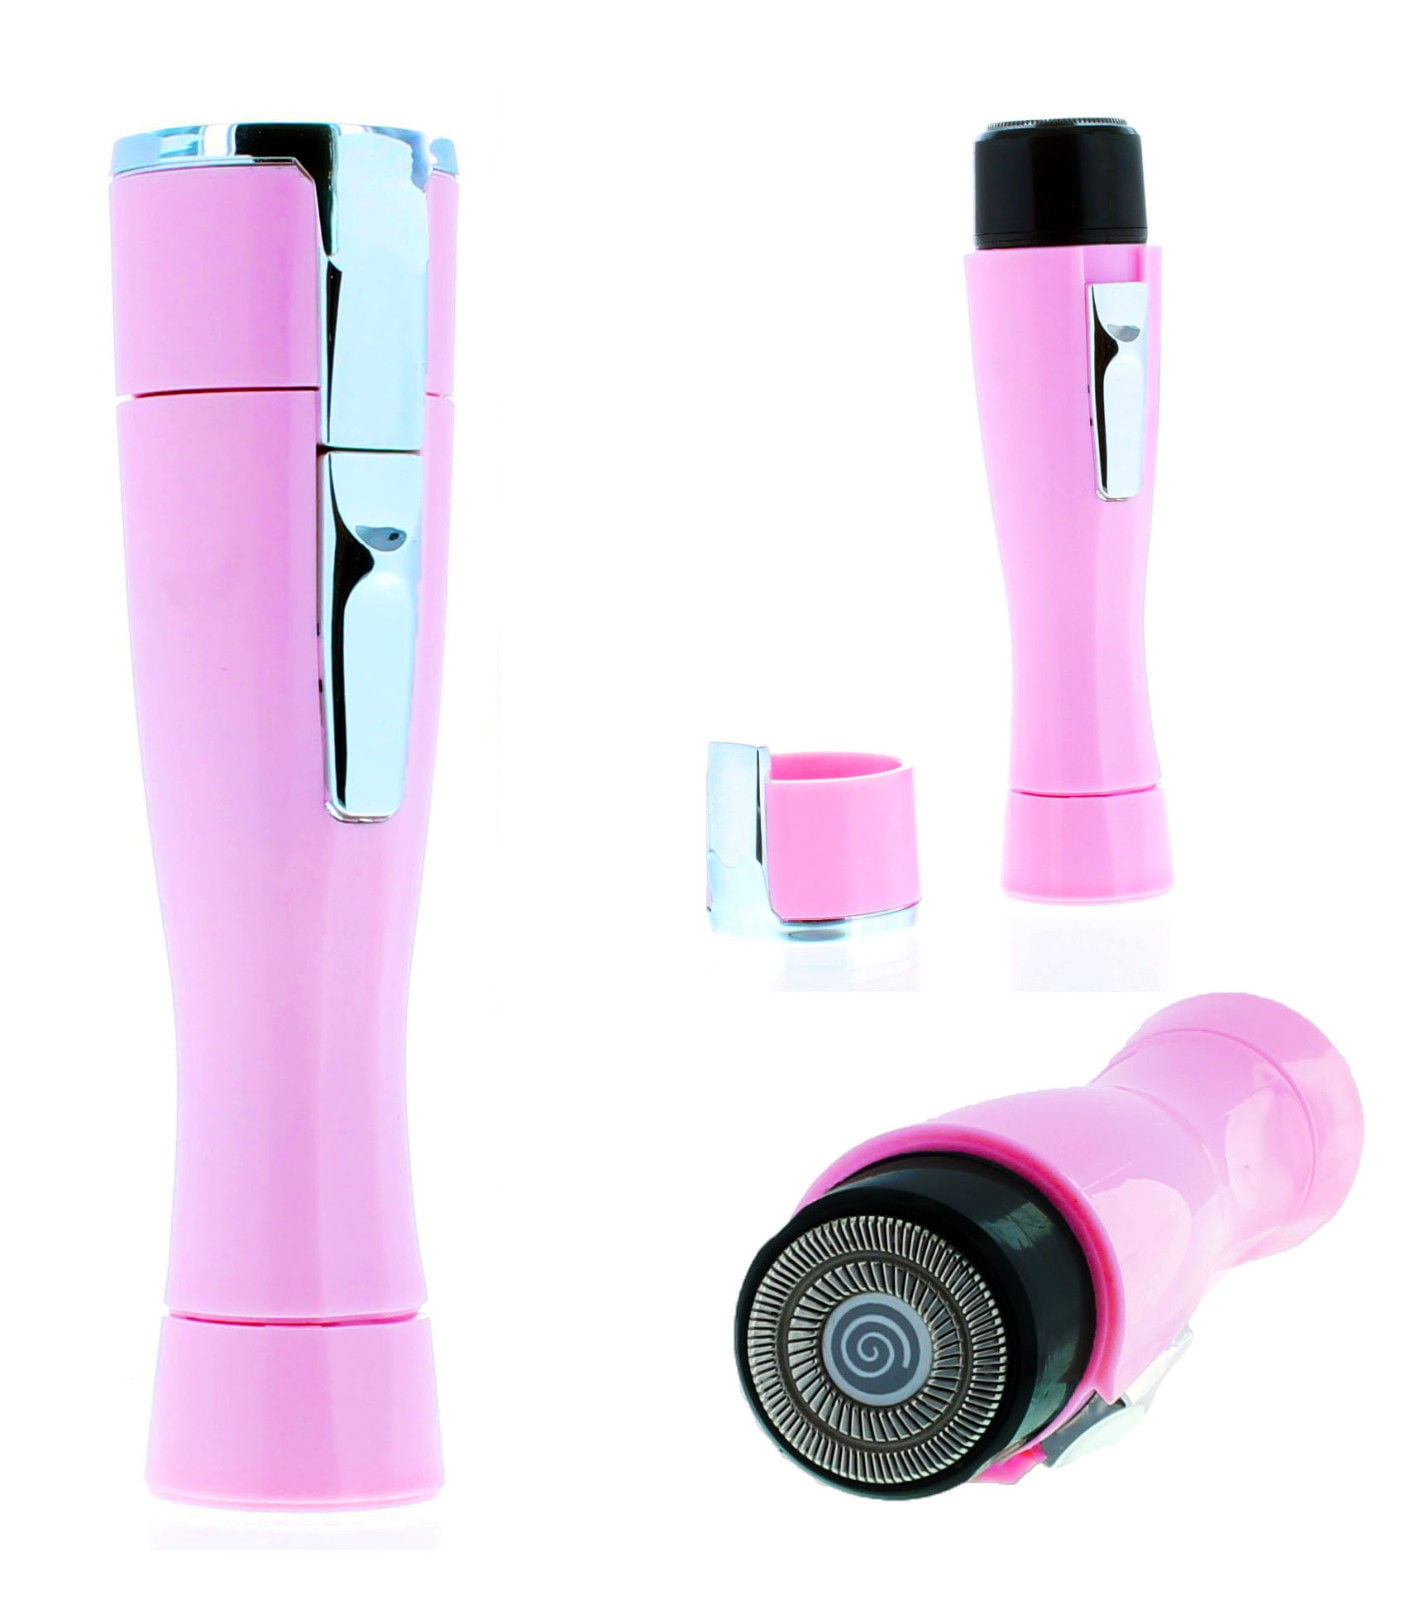 ladies face shaver flawless